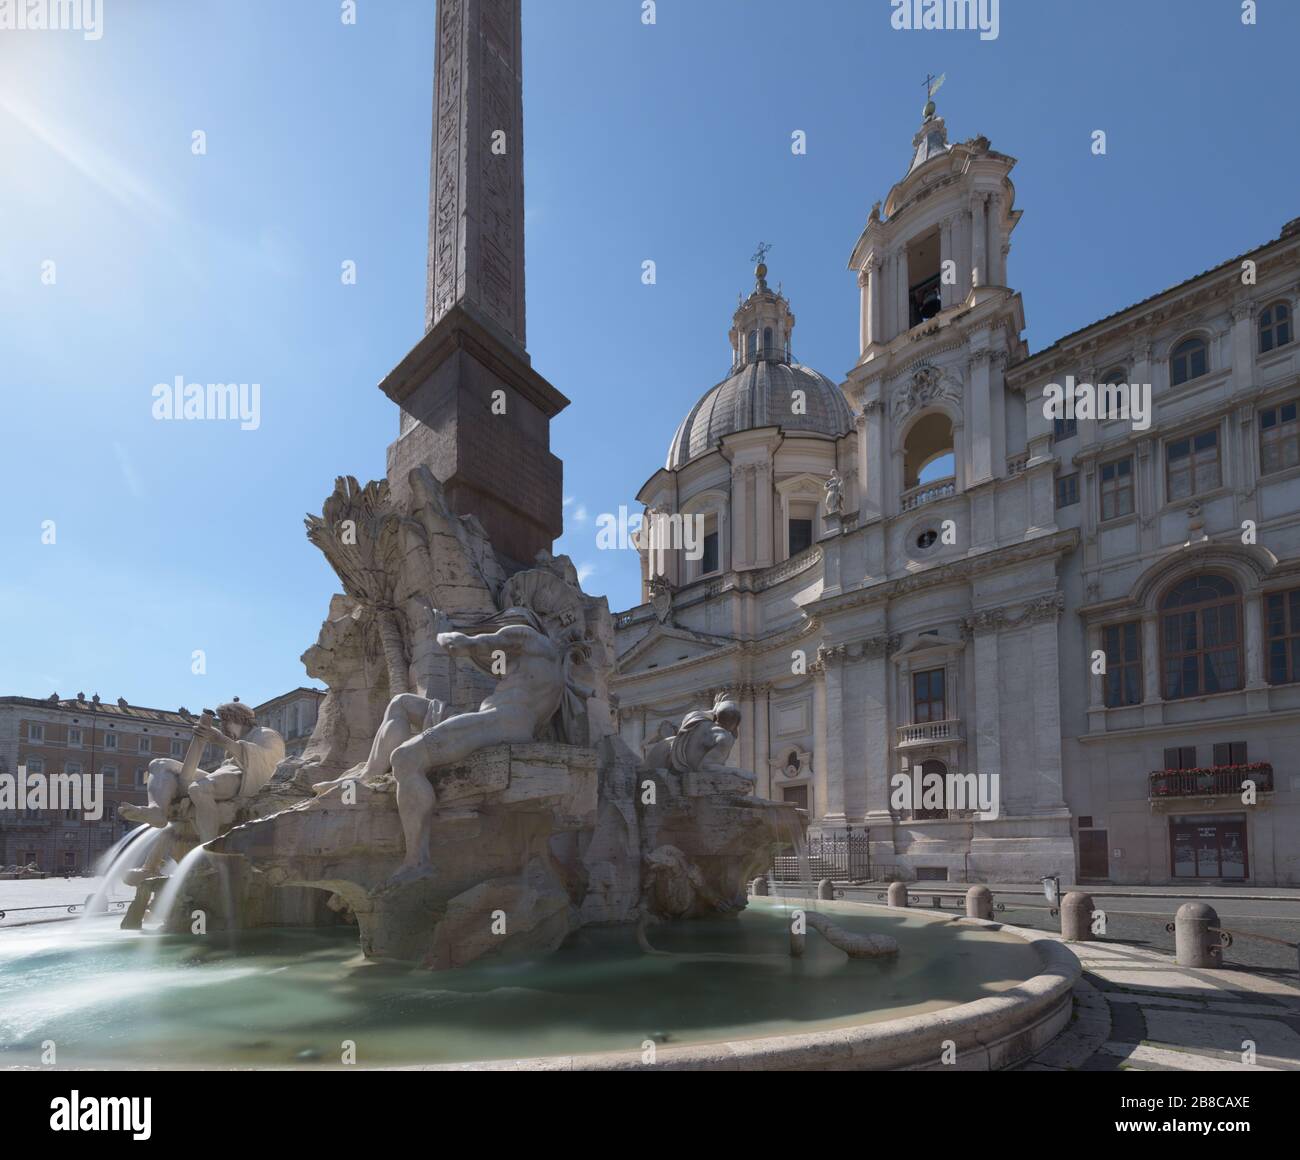 Piazza Navona is a famous central square in Rome, adorned with Baroque fountains and surrounded by churches and palaces from the Renaissance. In the c Stock Photo